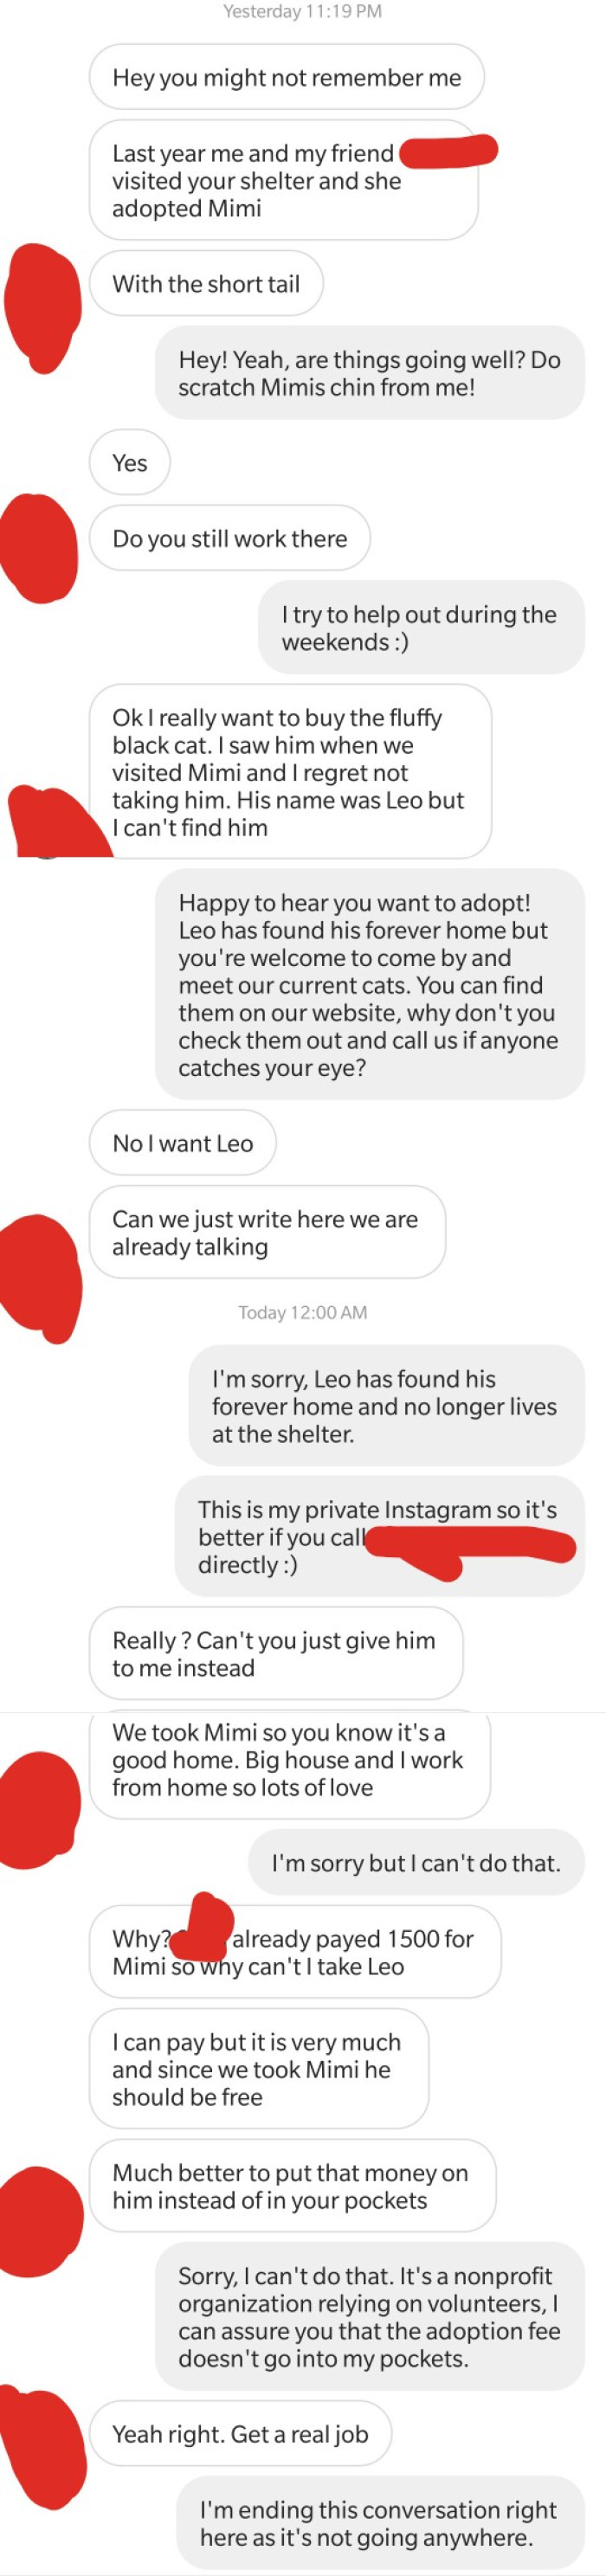 Unimpressed by the conversation, the shelter volunteer ended the chat